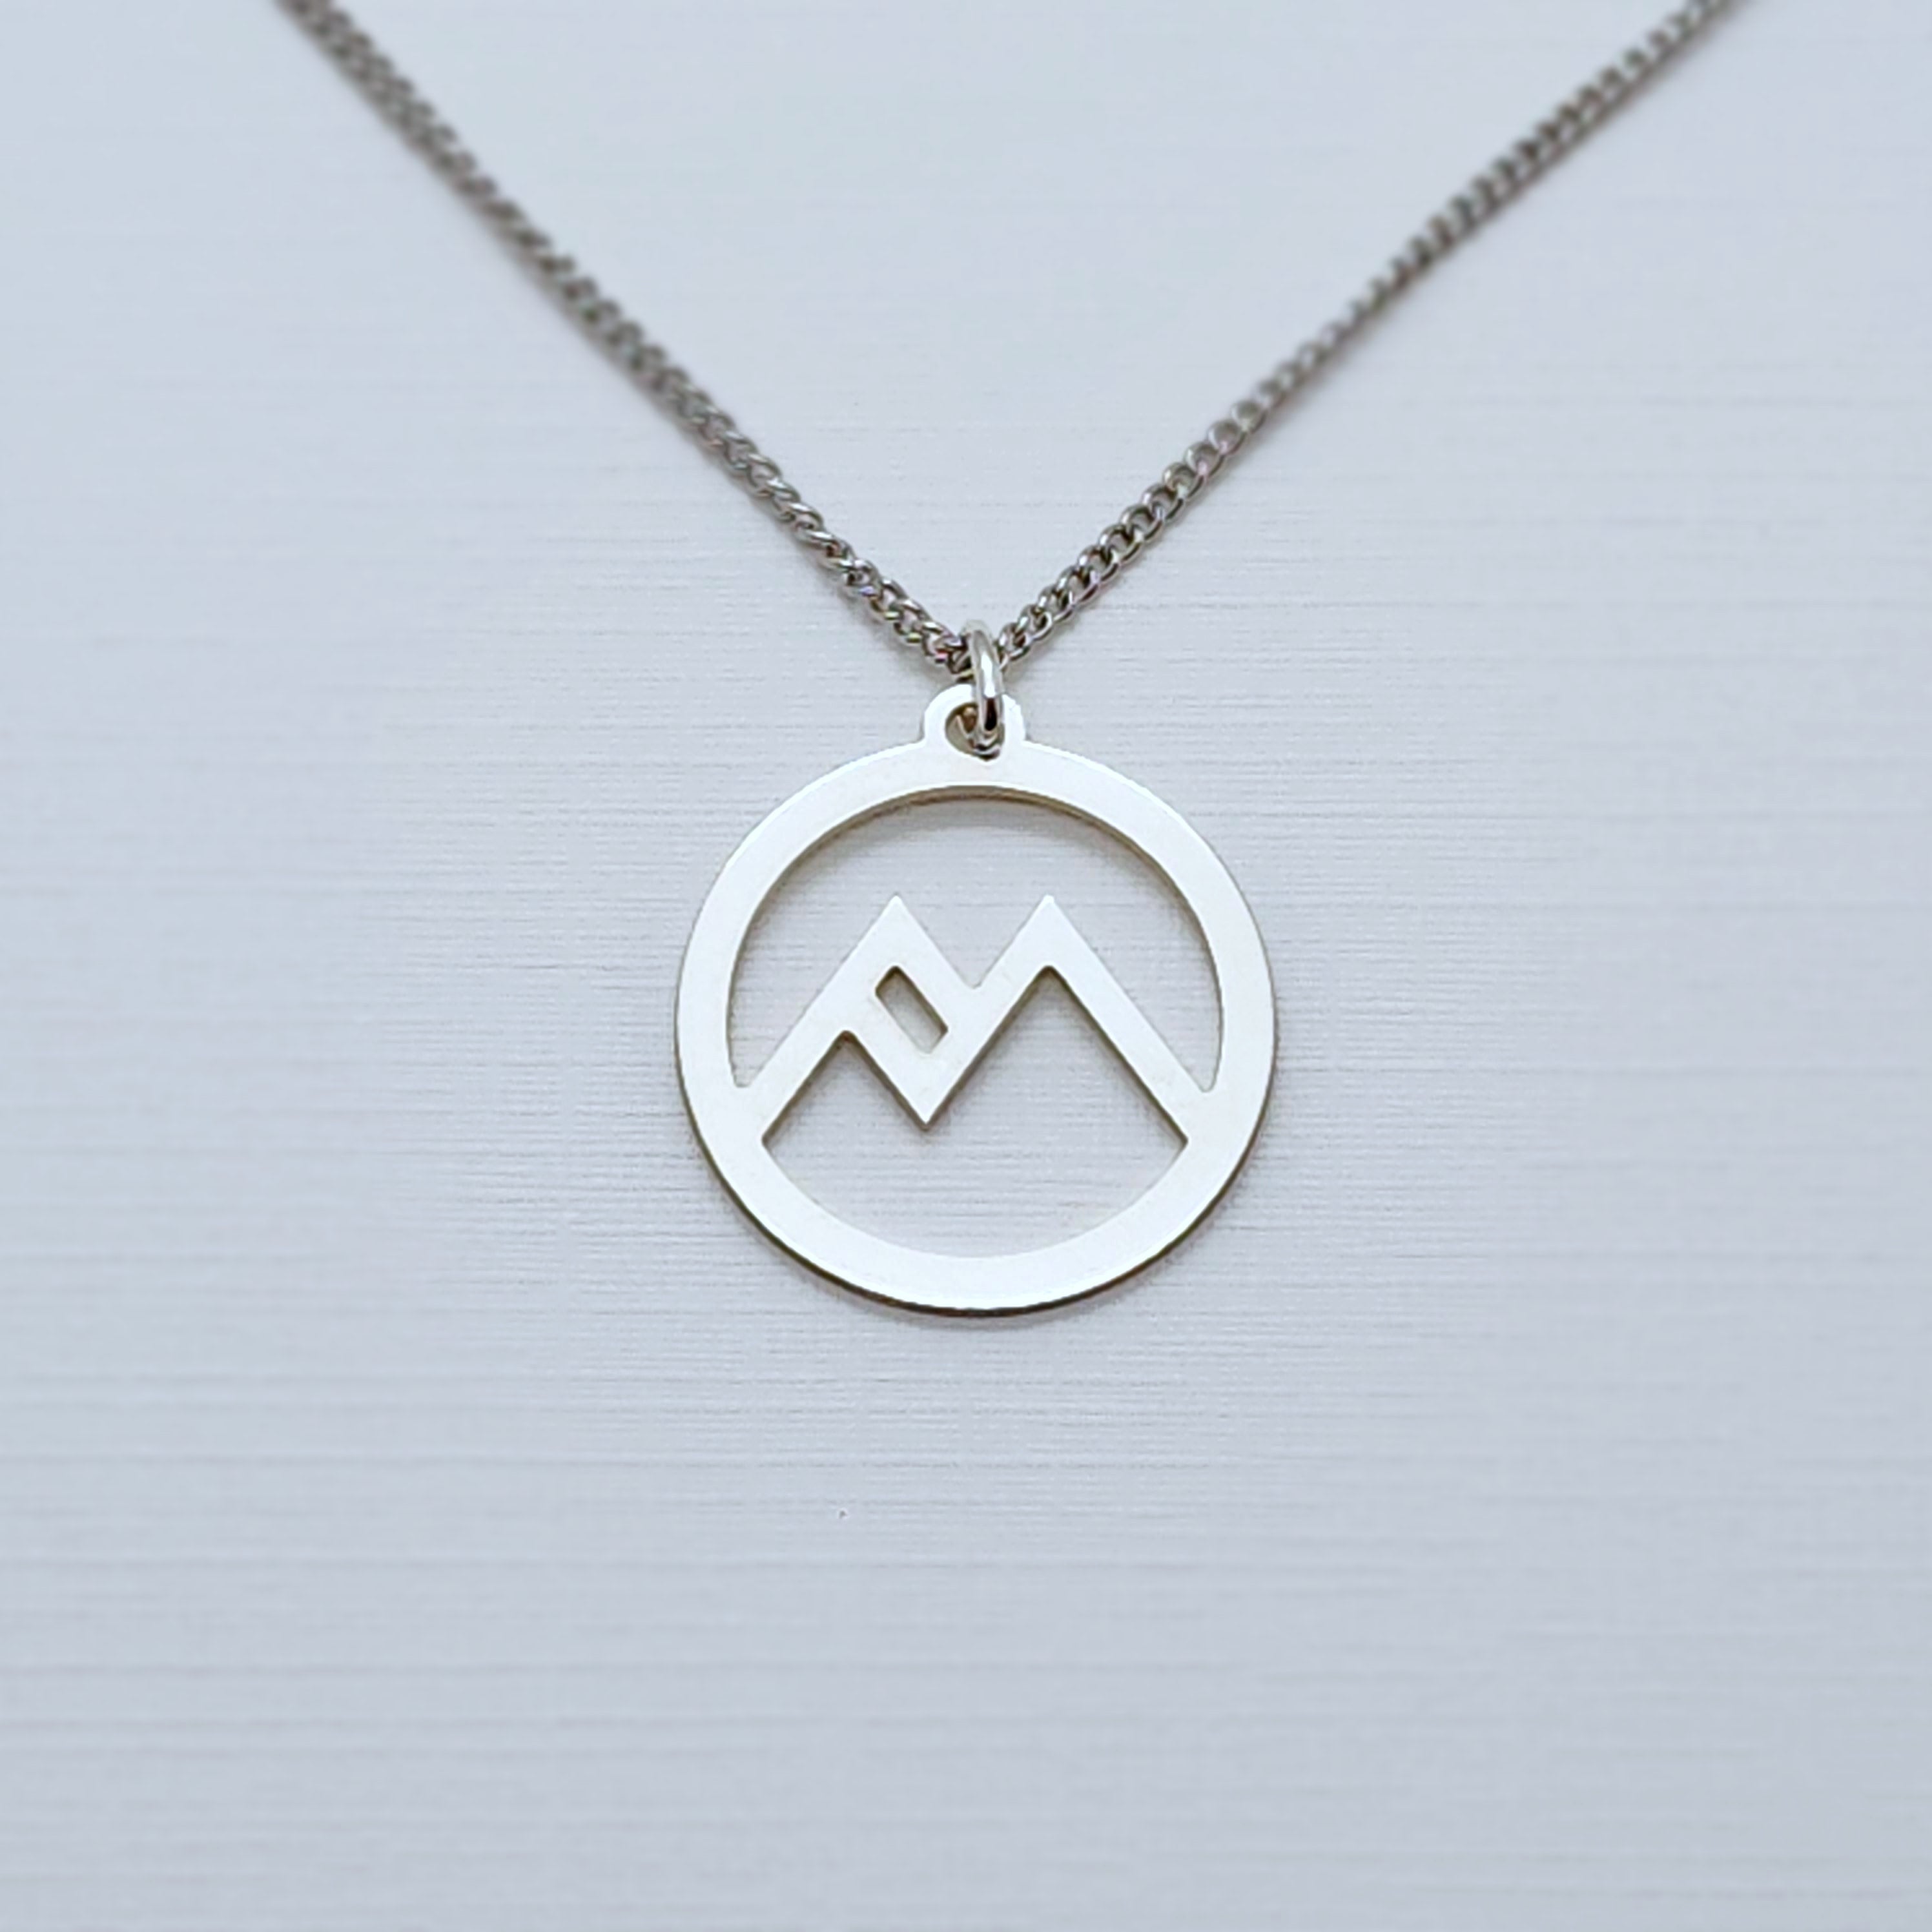 Free Form Sterling Silver Pendant (Includes Chain) – Meraki Minted